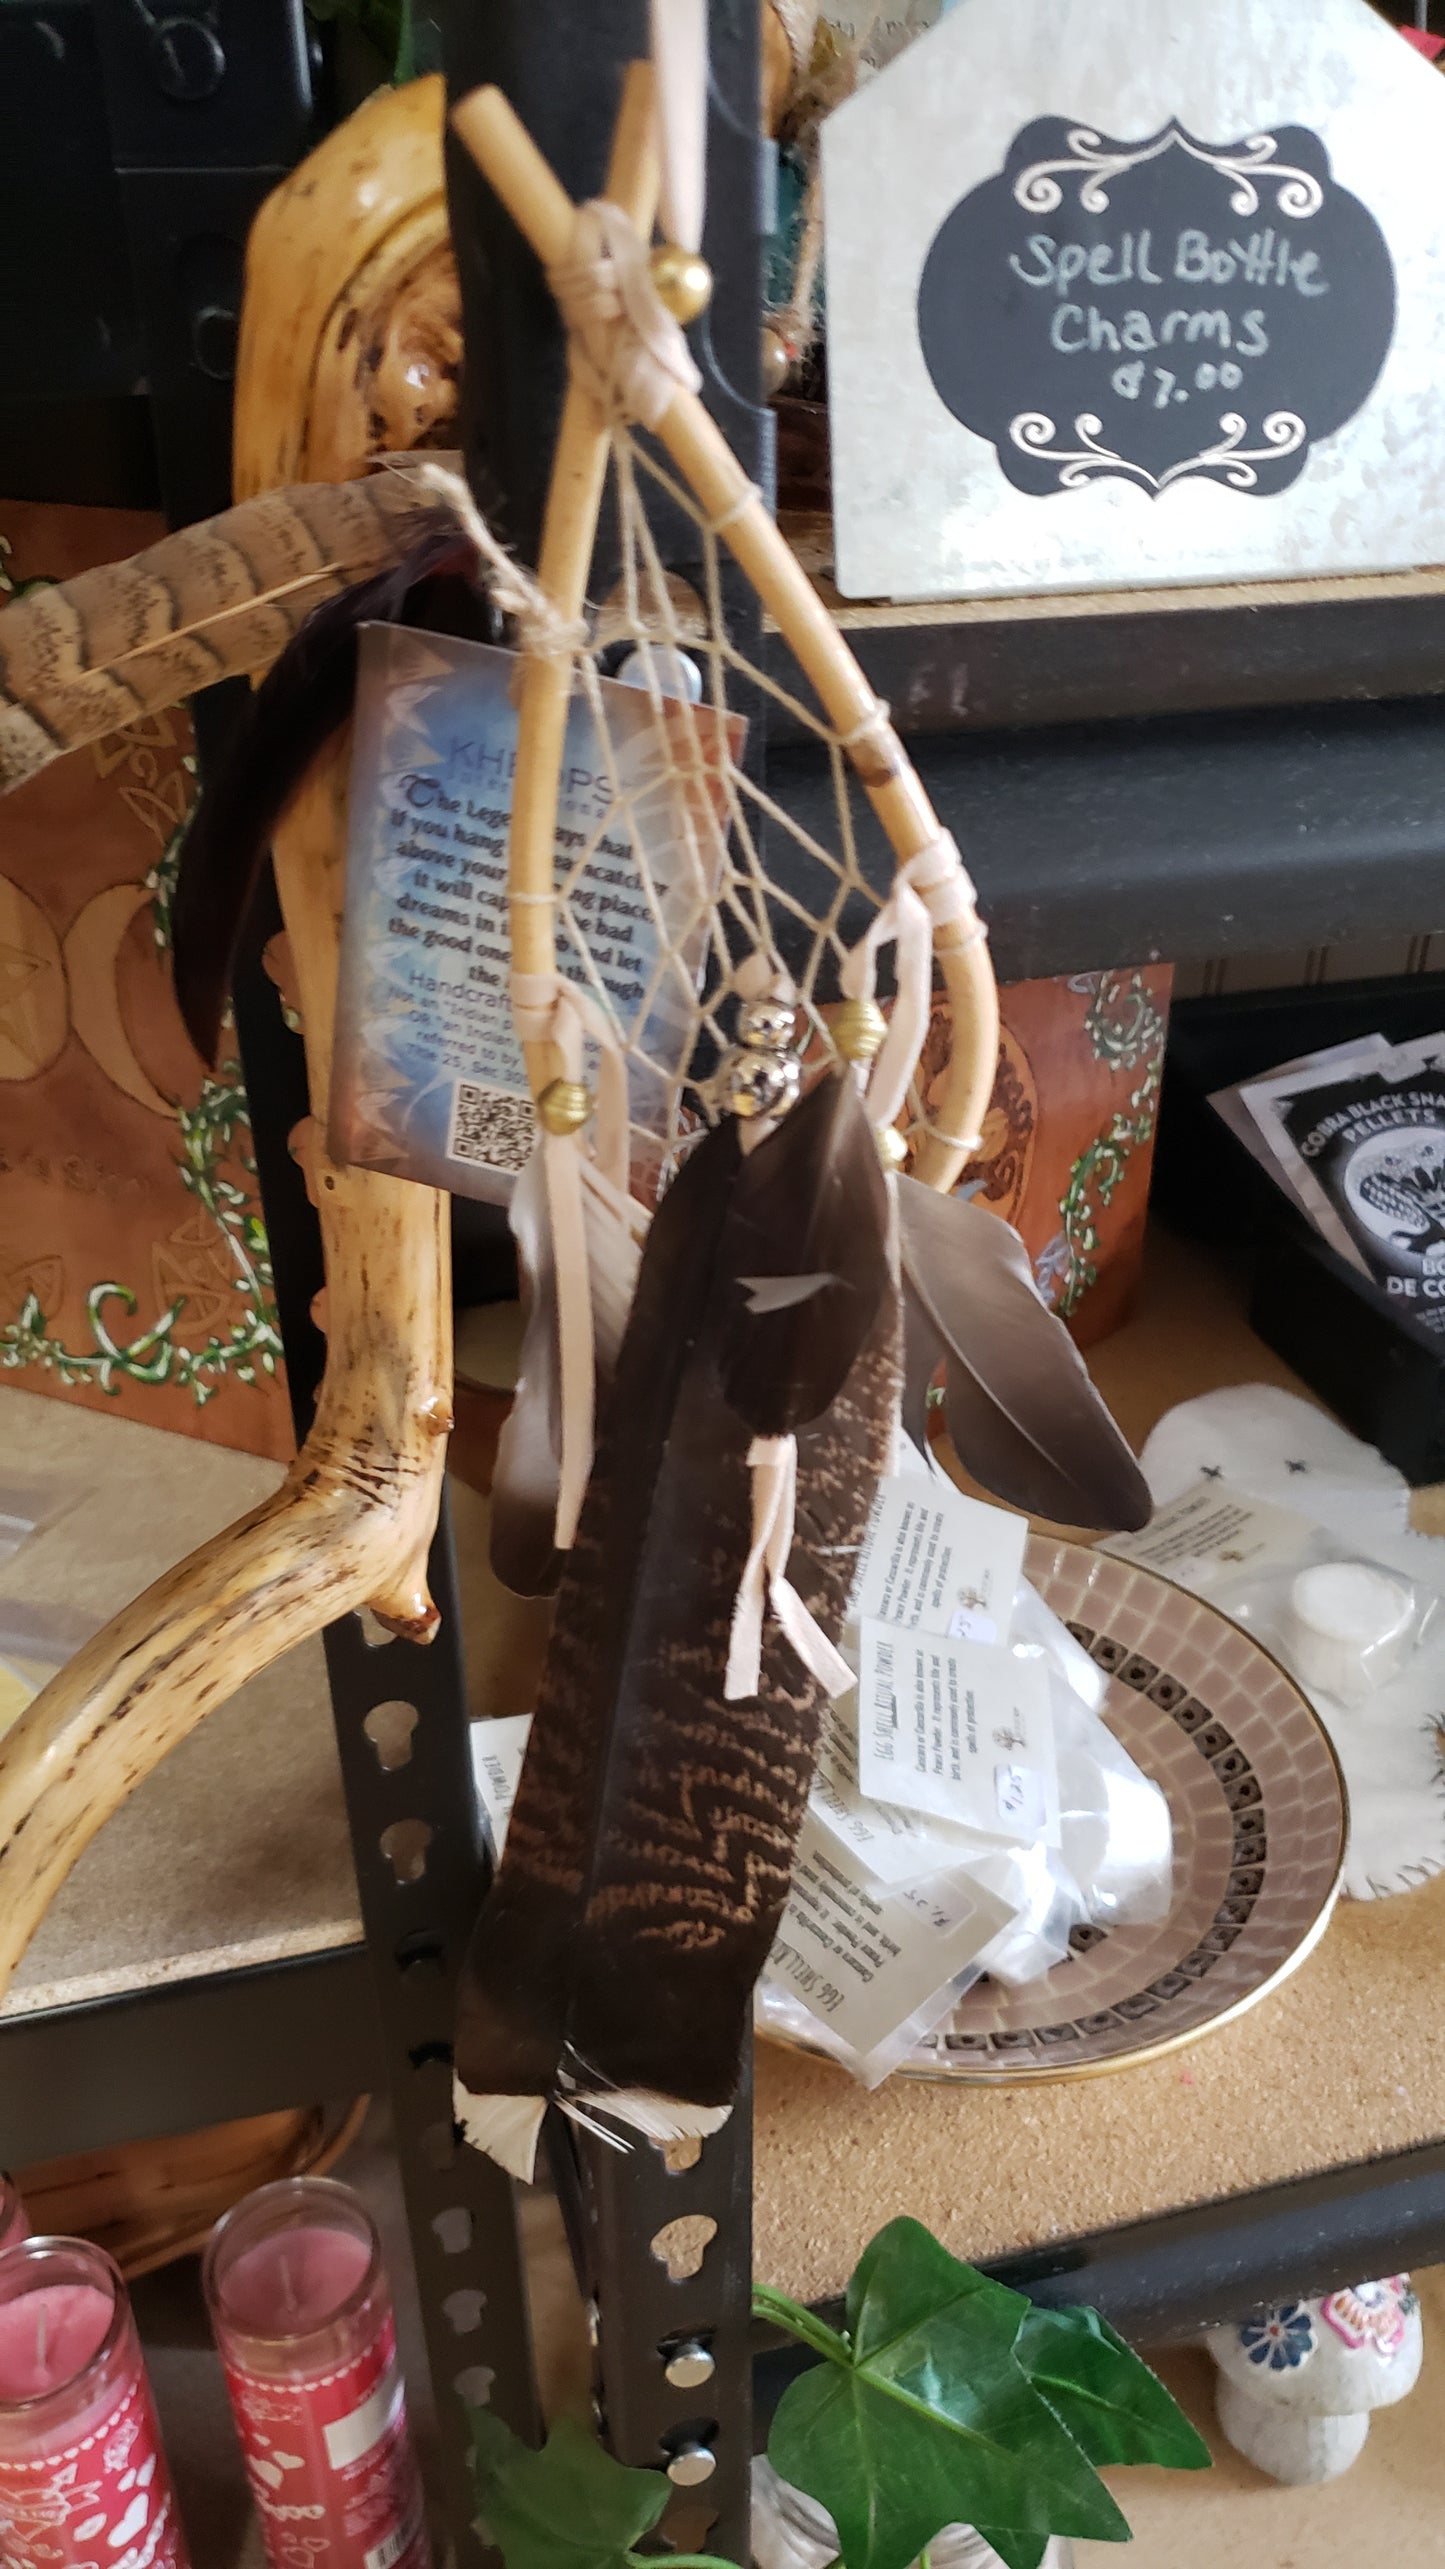 Teardrop Dream Catcher-God of the Forest - Tree Of Life Shoppe